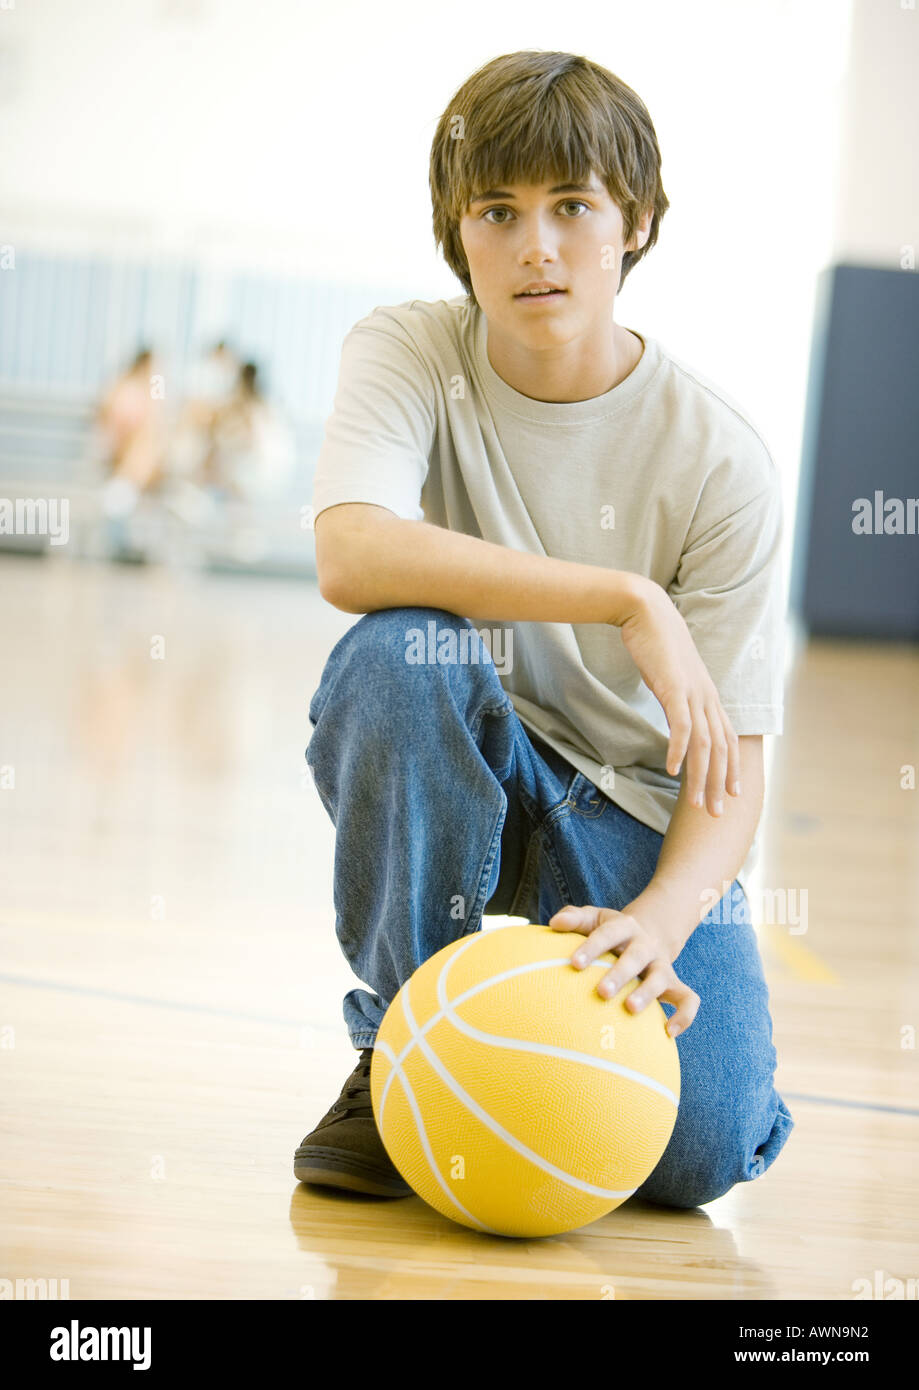 Teen boy crouching with basketball in school gym Stock Photo